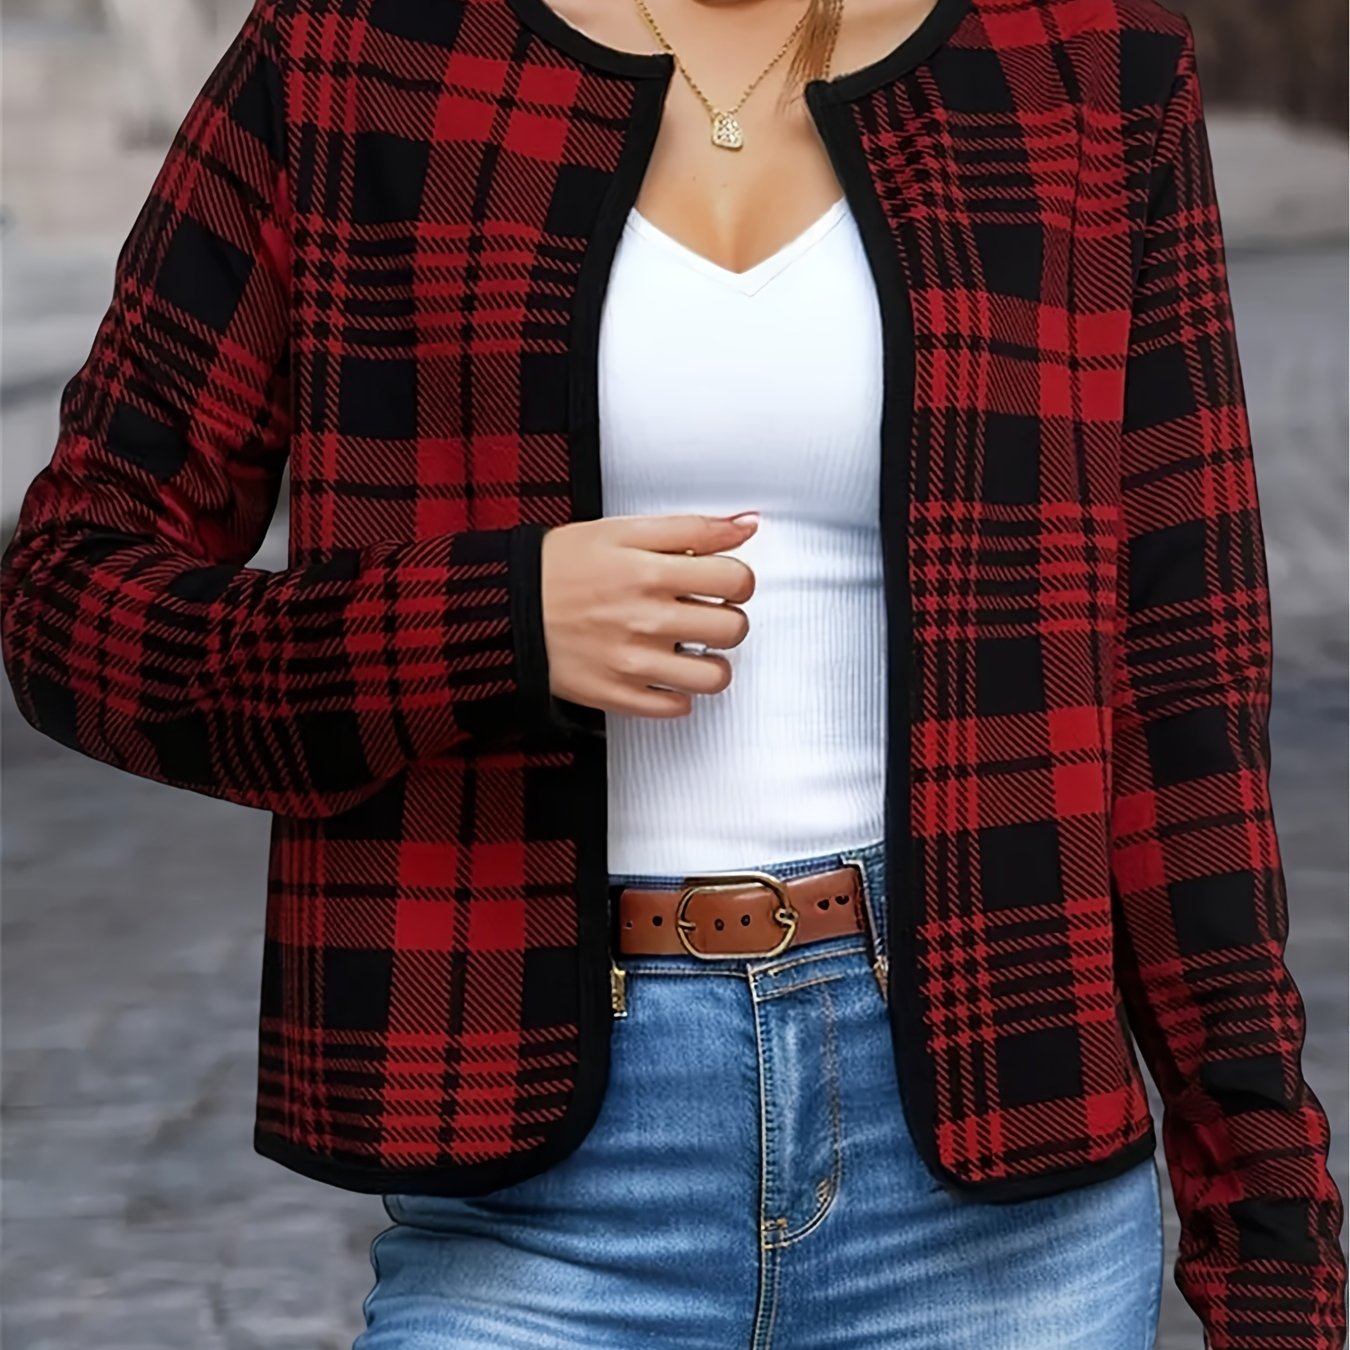 Plaid Print Crew Neck Long Sleeve Crop Jacket, Casual Loose Comfy Stylish Open Front Outerwear, Women's Clothing